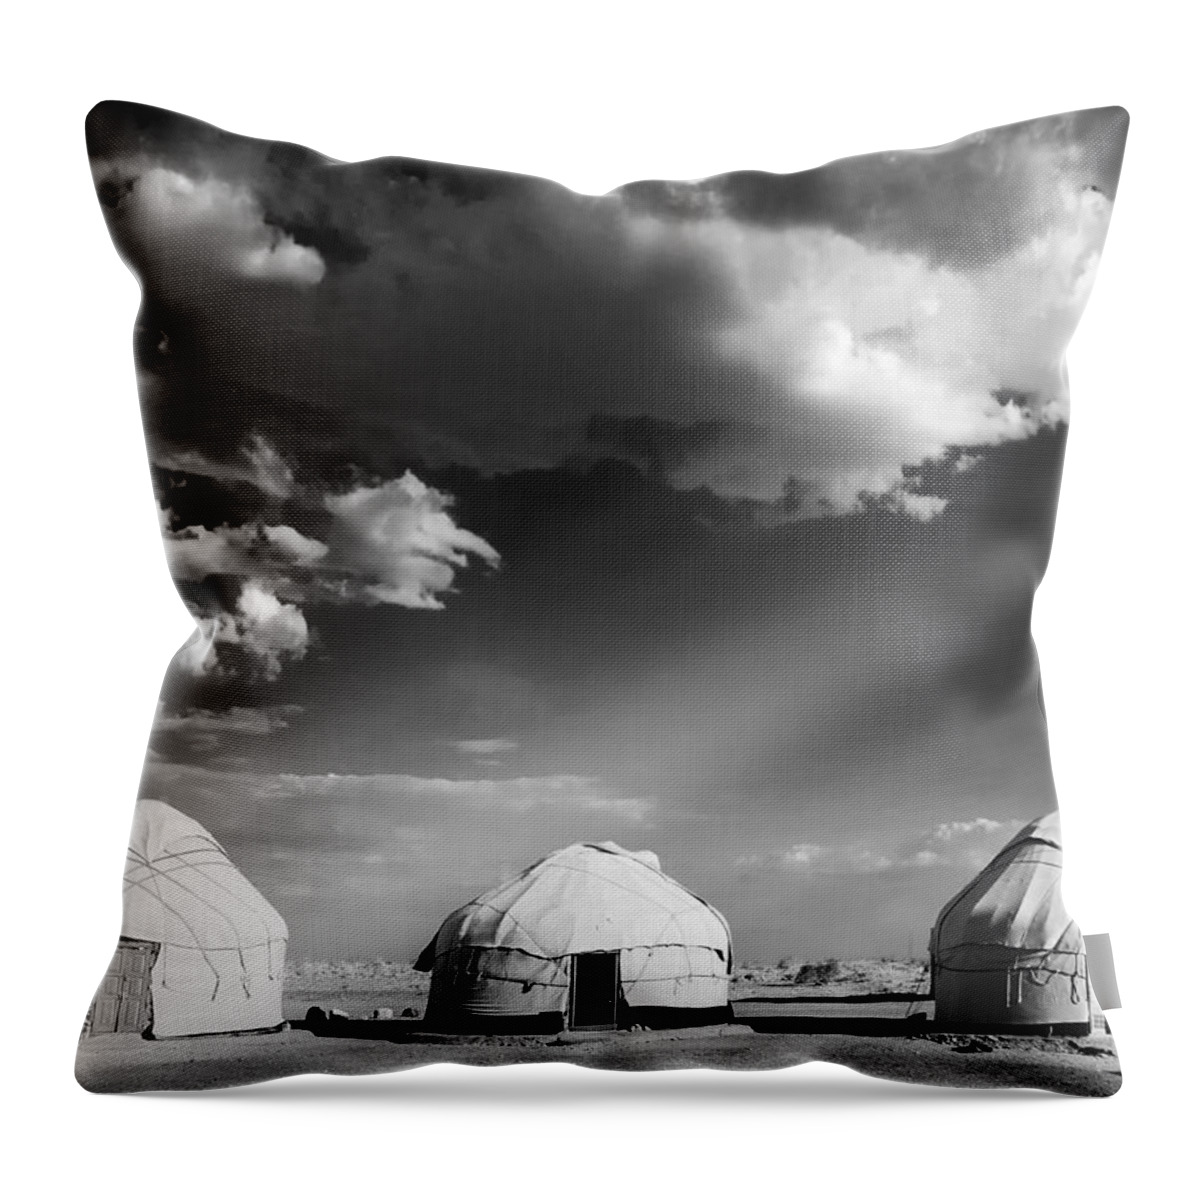 Yurts Throw Pillow featuring the photograph Yurts by Dominic Piperata